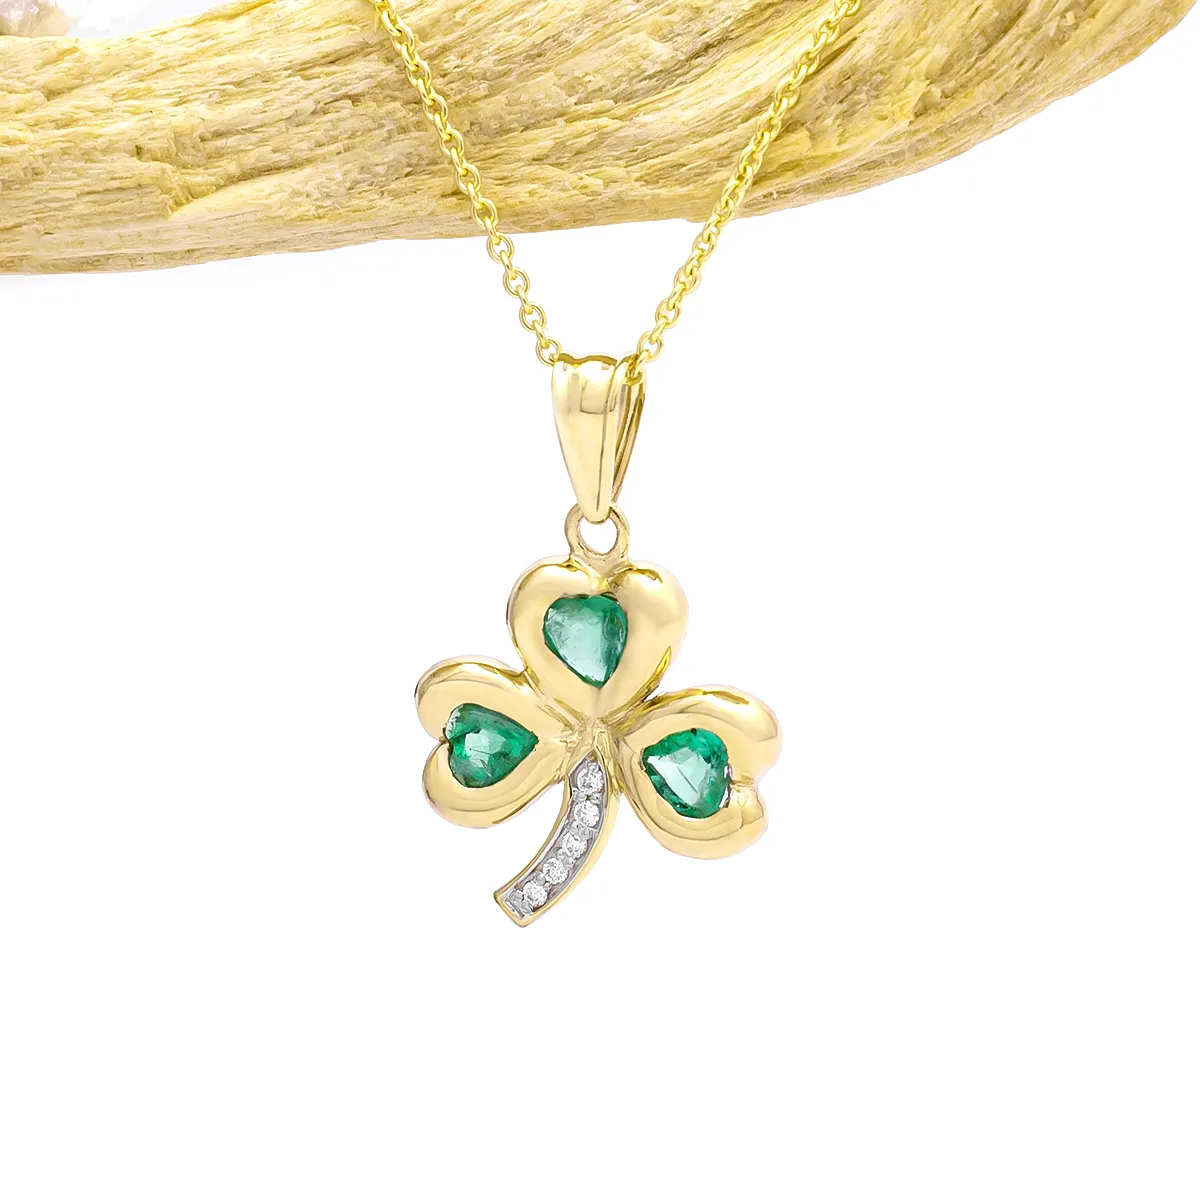 Magnificent Emerald and Diamond Shamrock Pendant in Gold Handcrafted I...